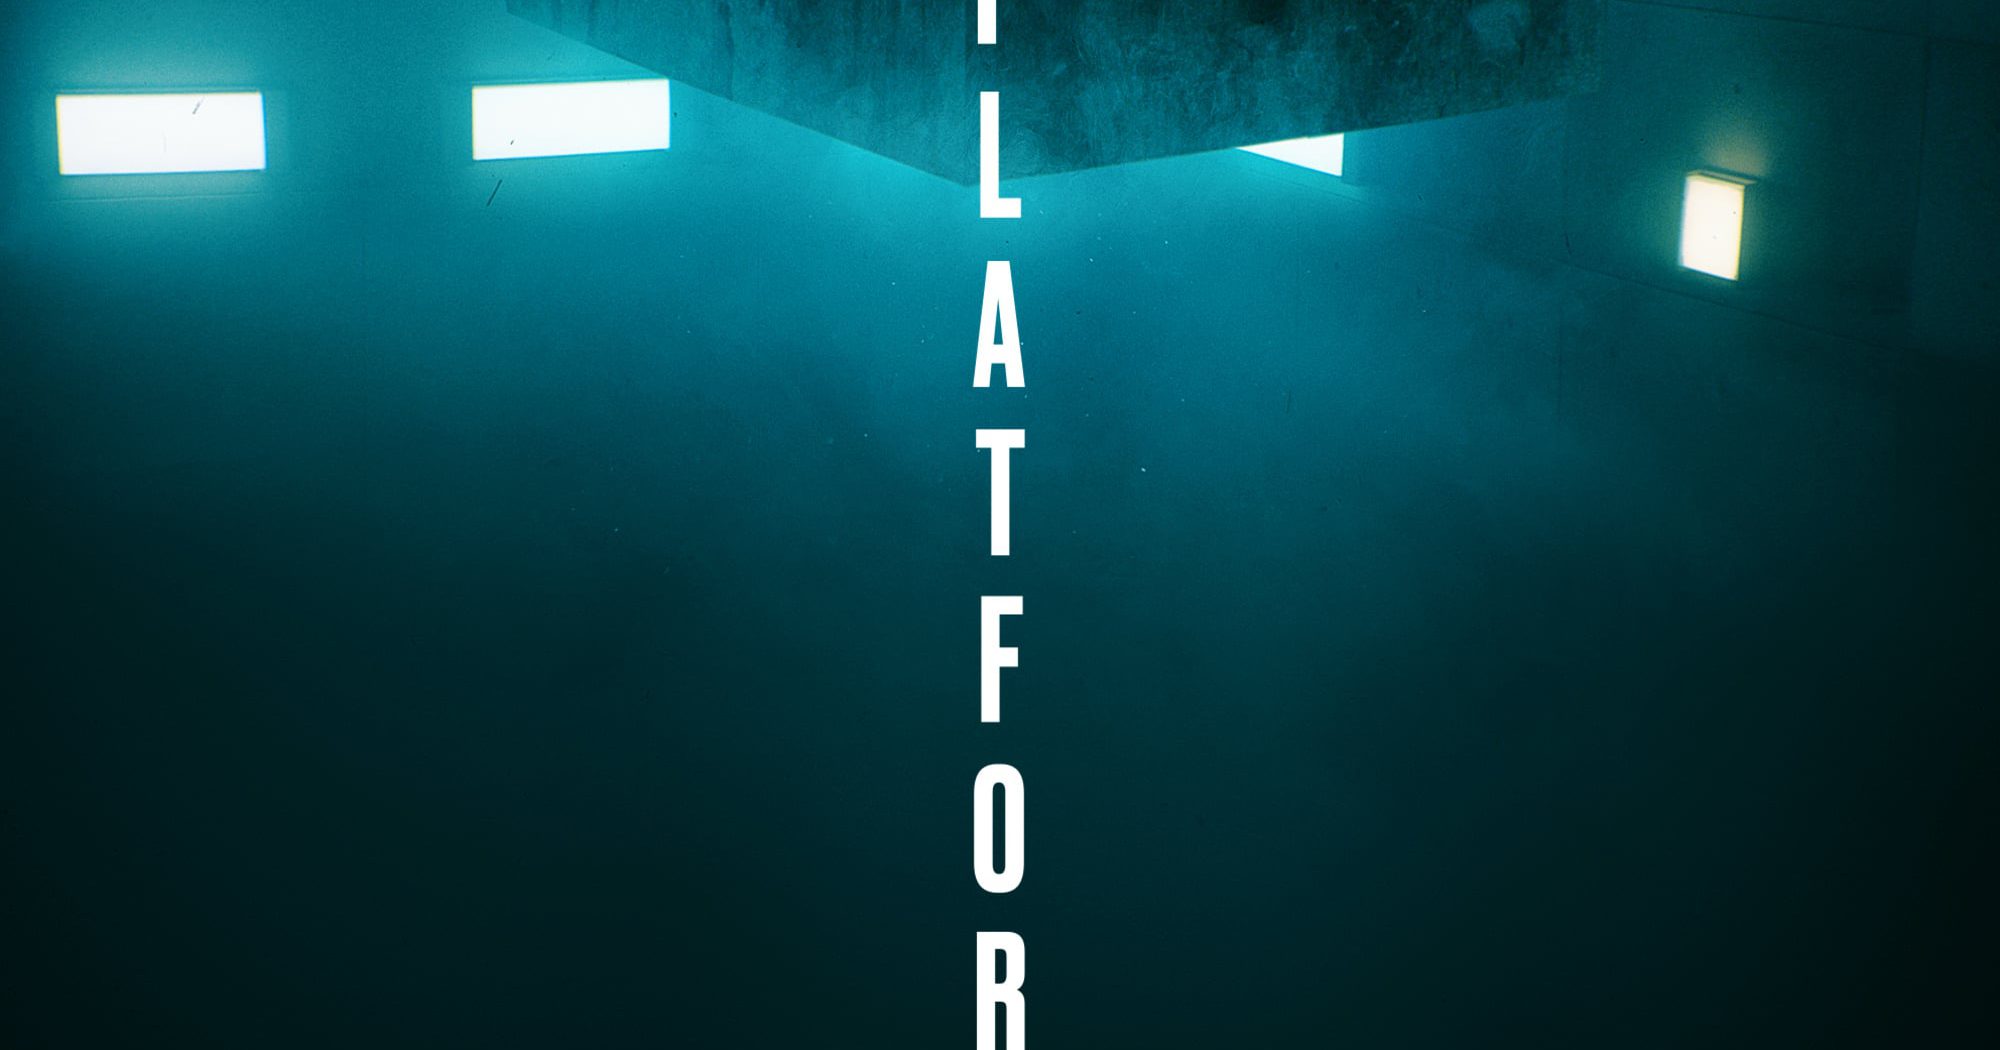 Poster for the movie "The Platform"